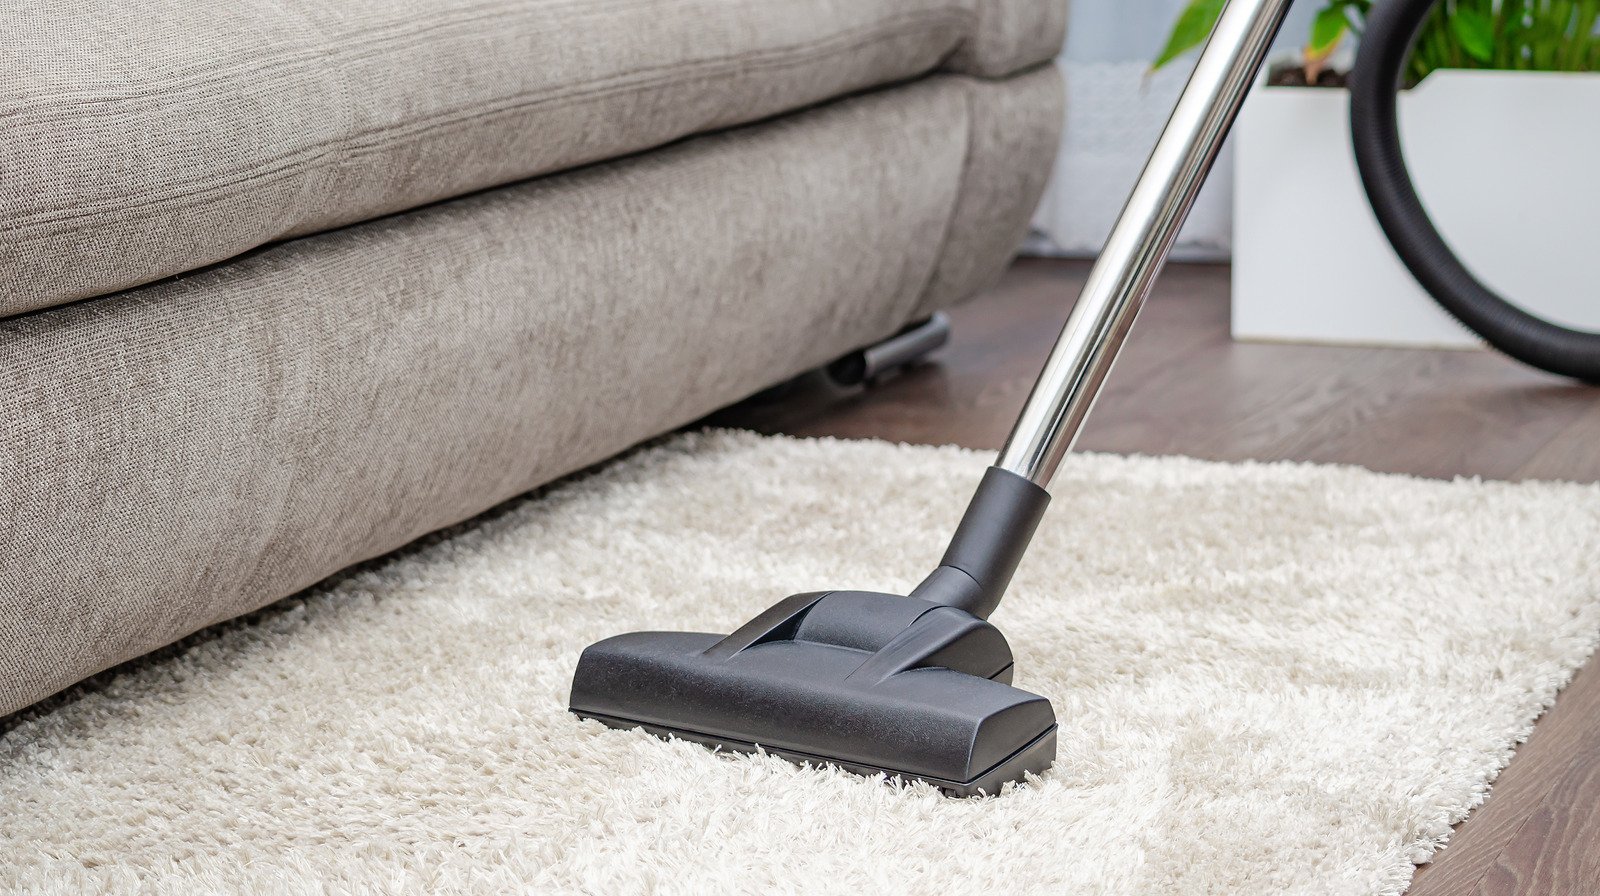 You Probably Didn't Know The Vacuum Cleaner In Your Home Can Do This - House Digest